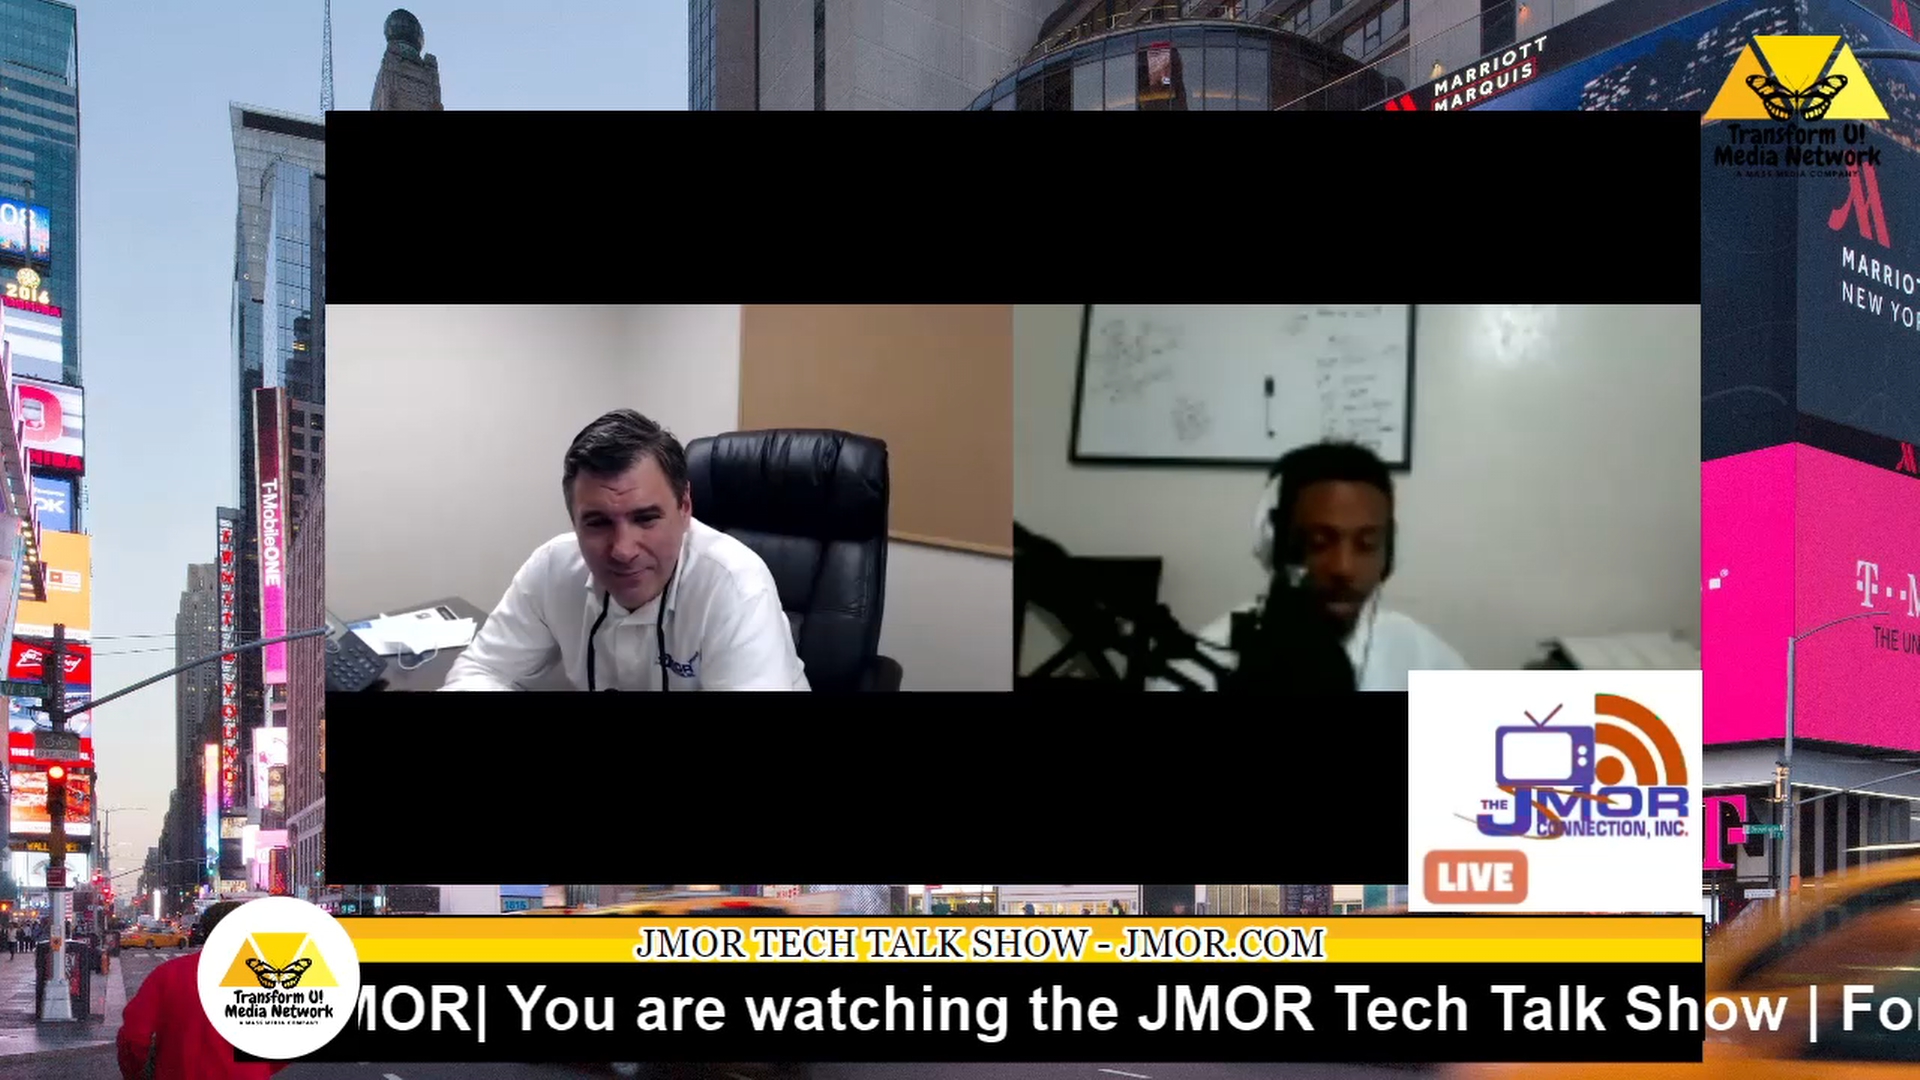 JMOR Tech Talk Show March 12, 2021:  Tech News Turning Waste into Something Useful